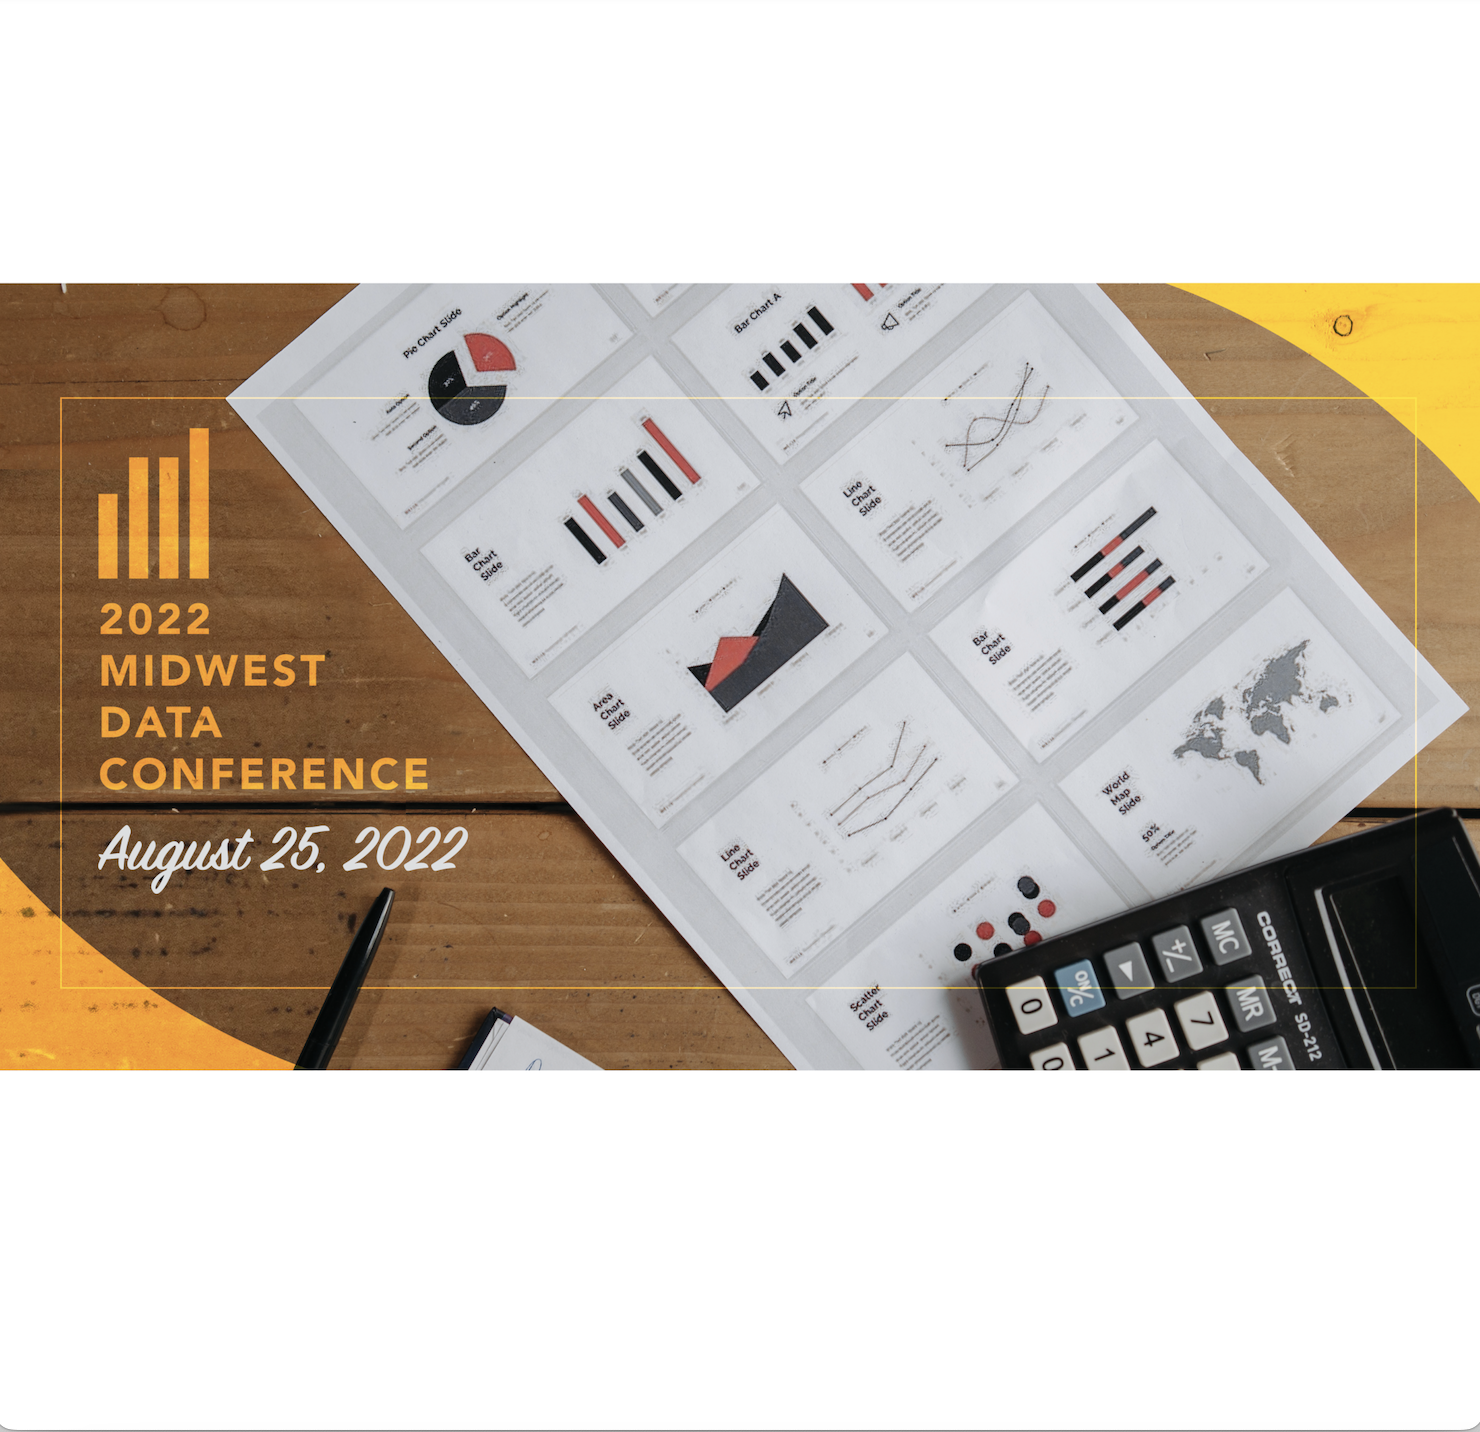 Midwest Data Conference, August 25, 2022